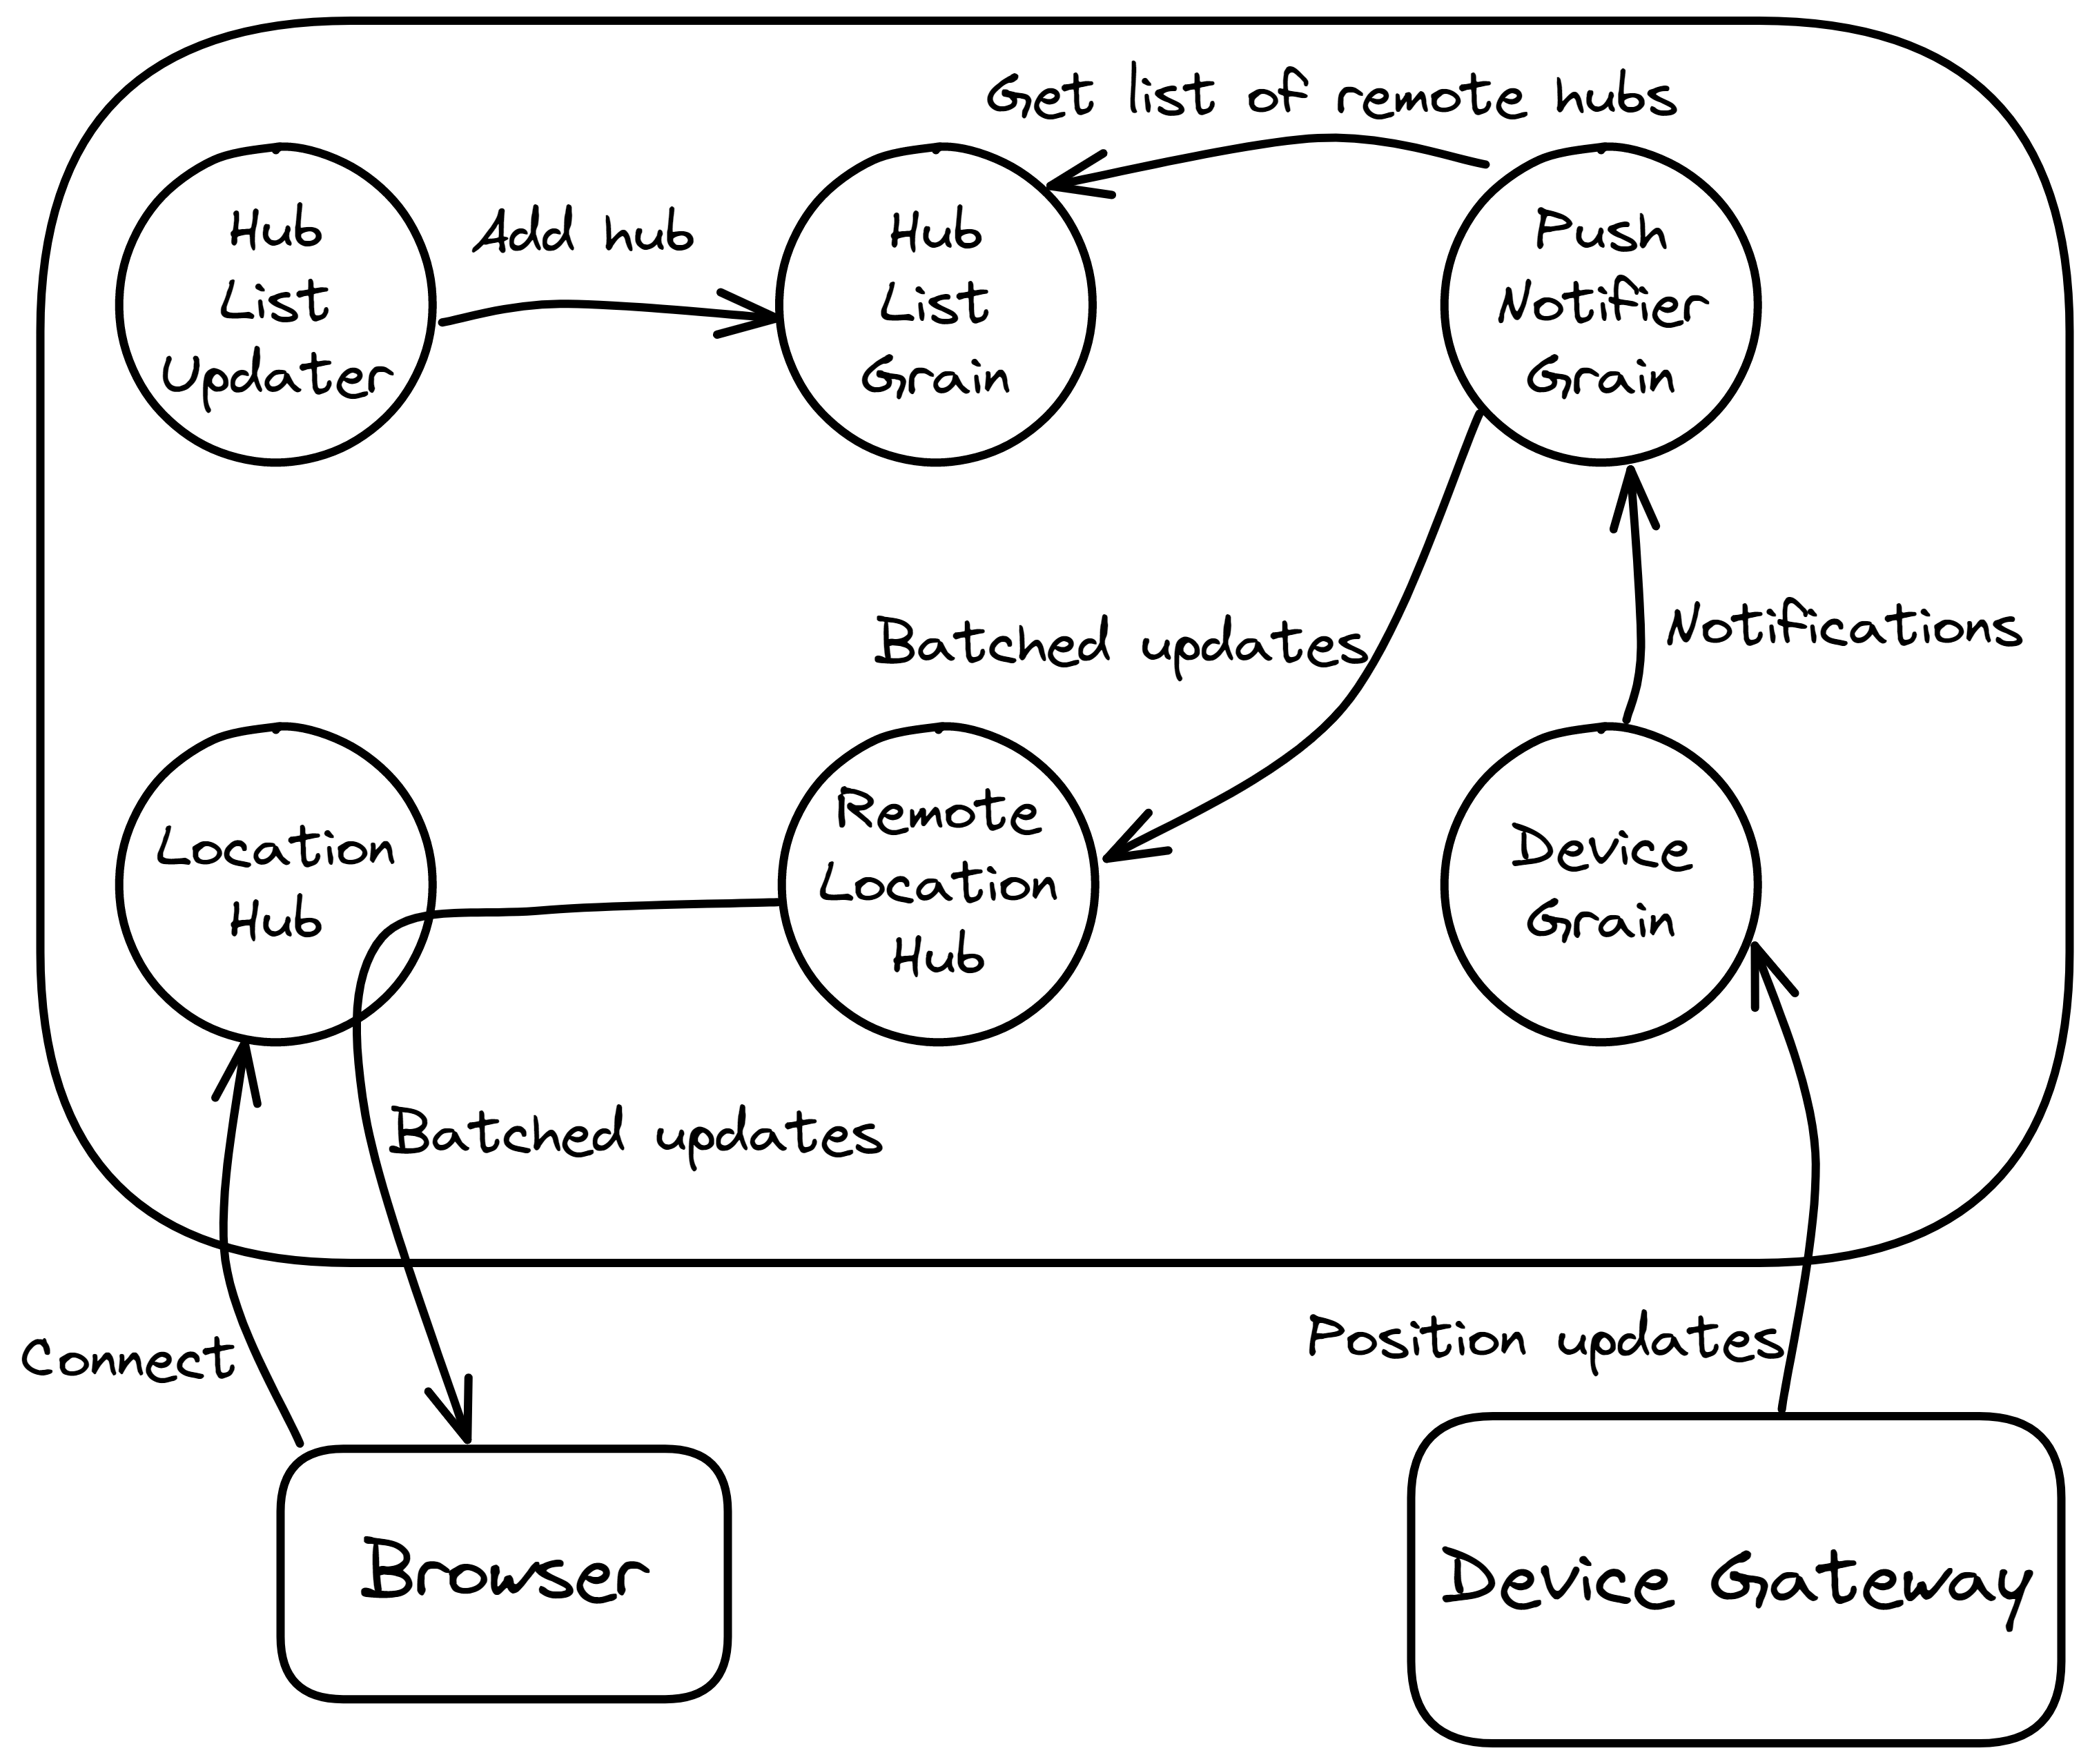 A diagram depicting the flow of data around the system